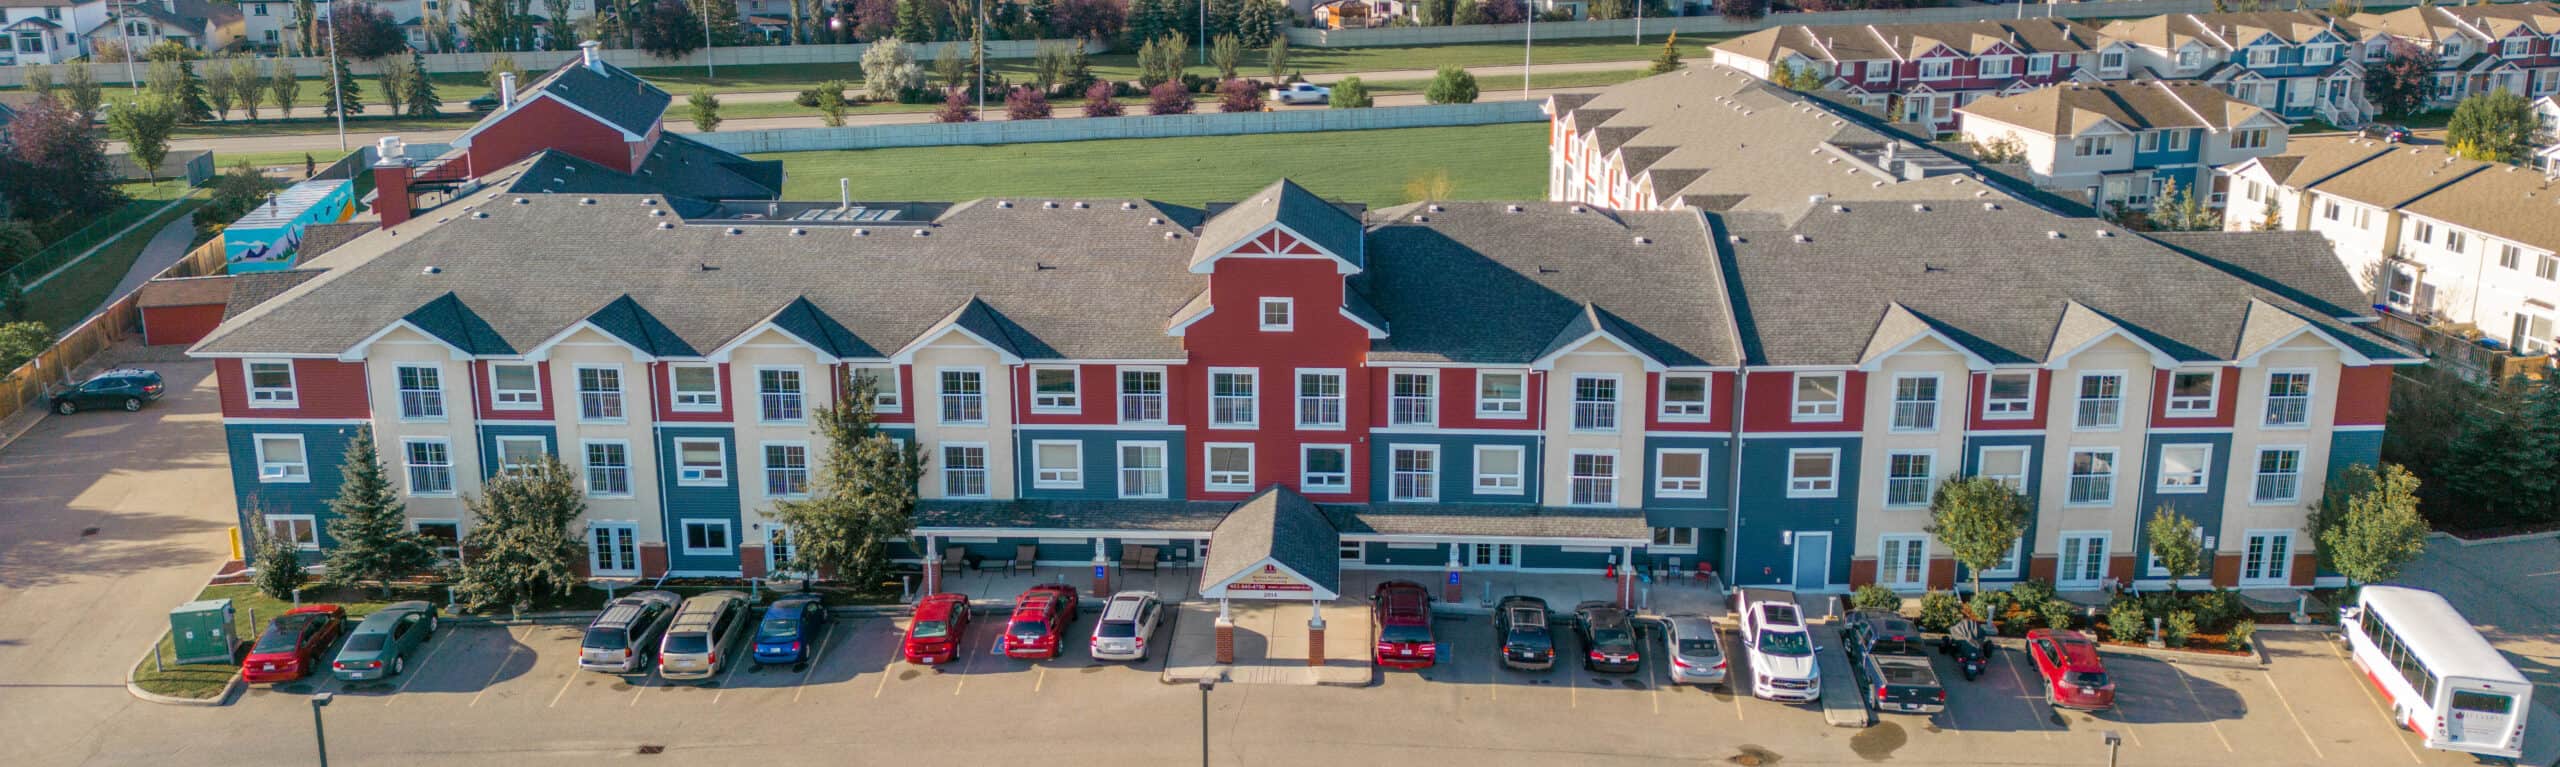 Colourful Apartment Complex in airdrie alberta by second generation exteriors